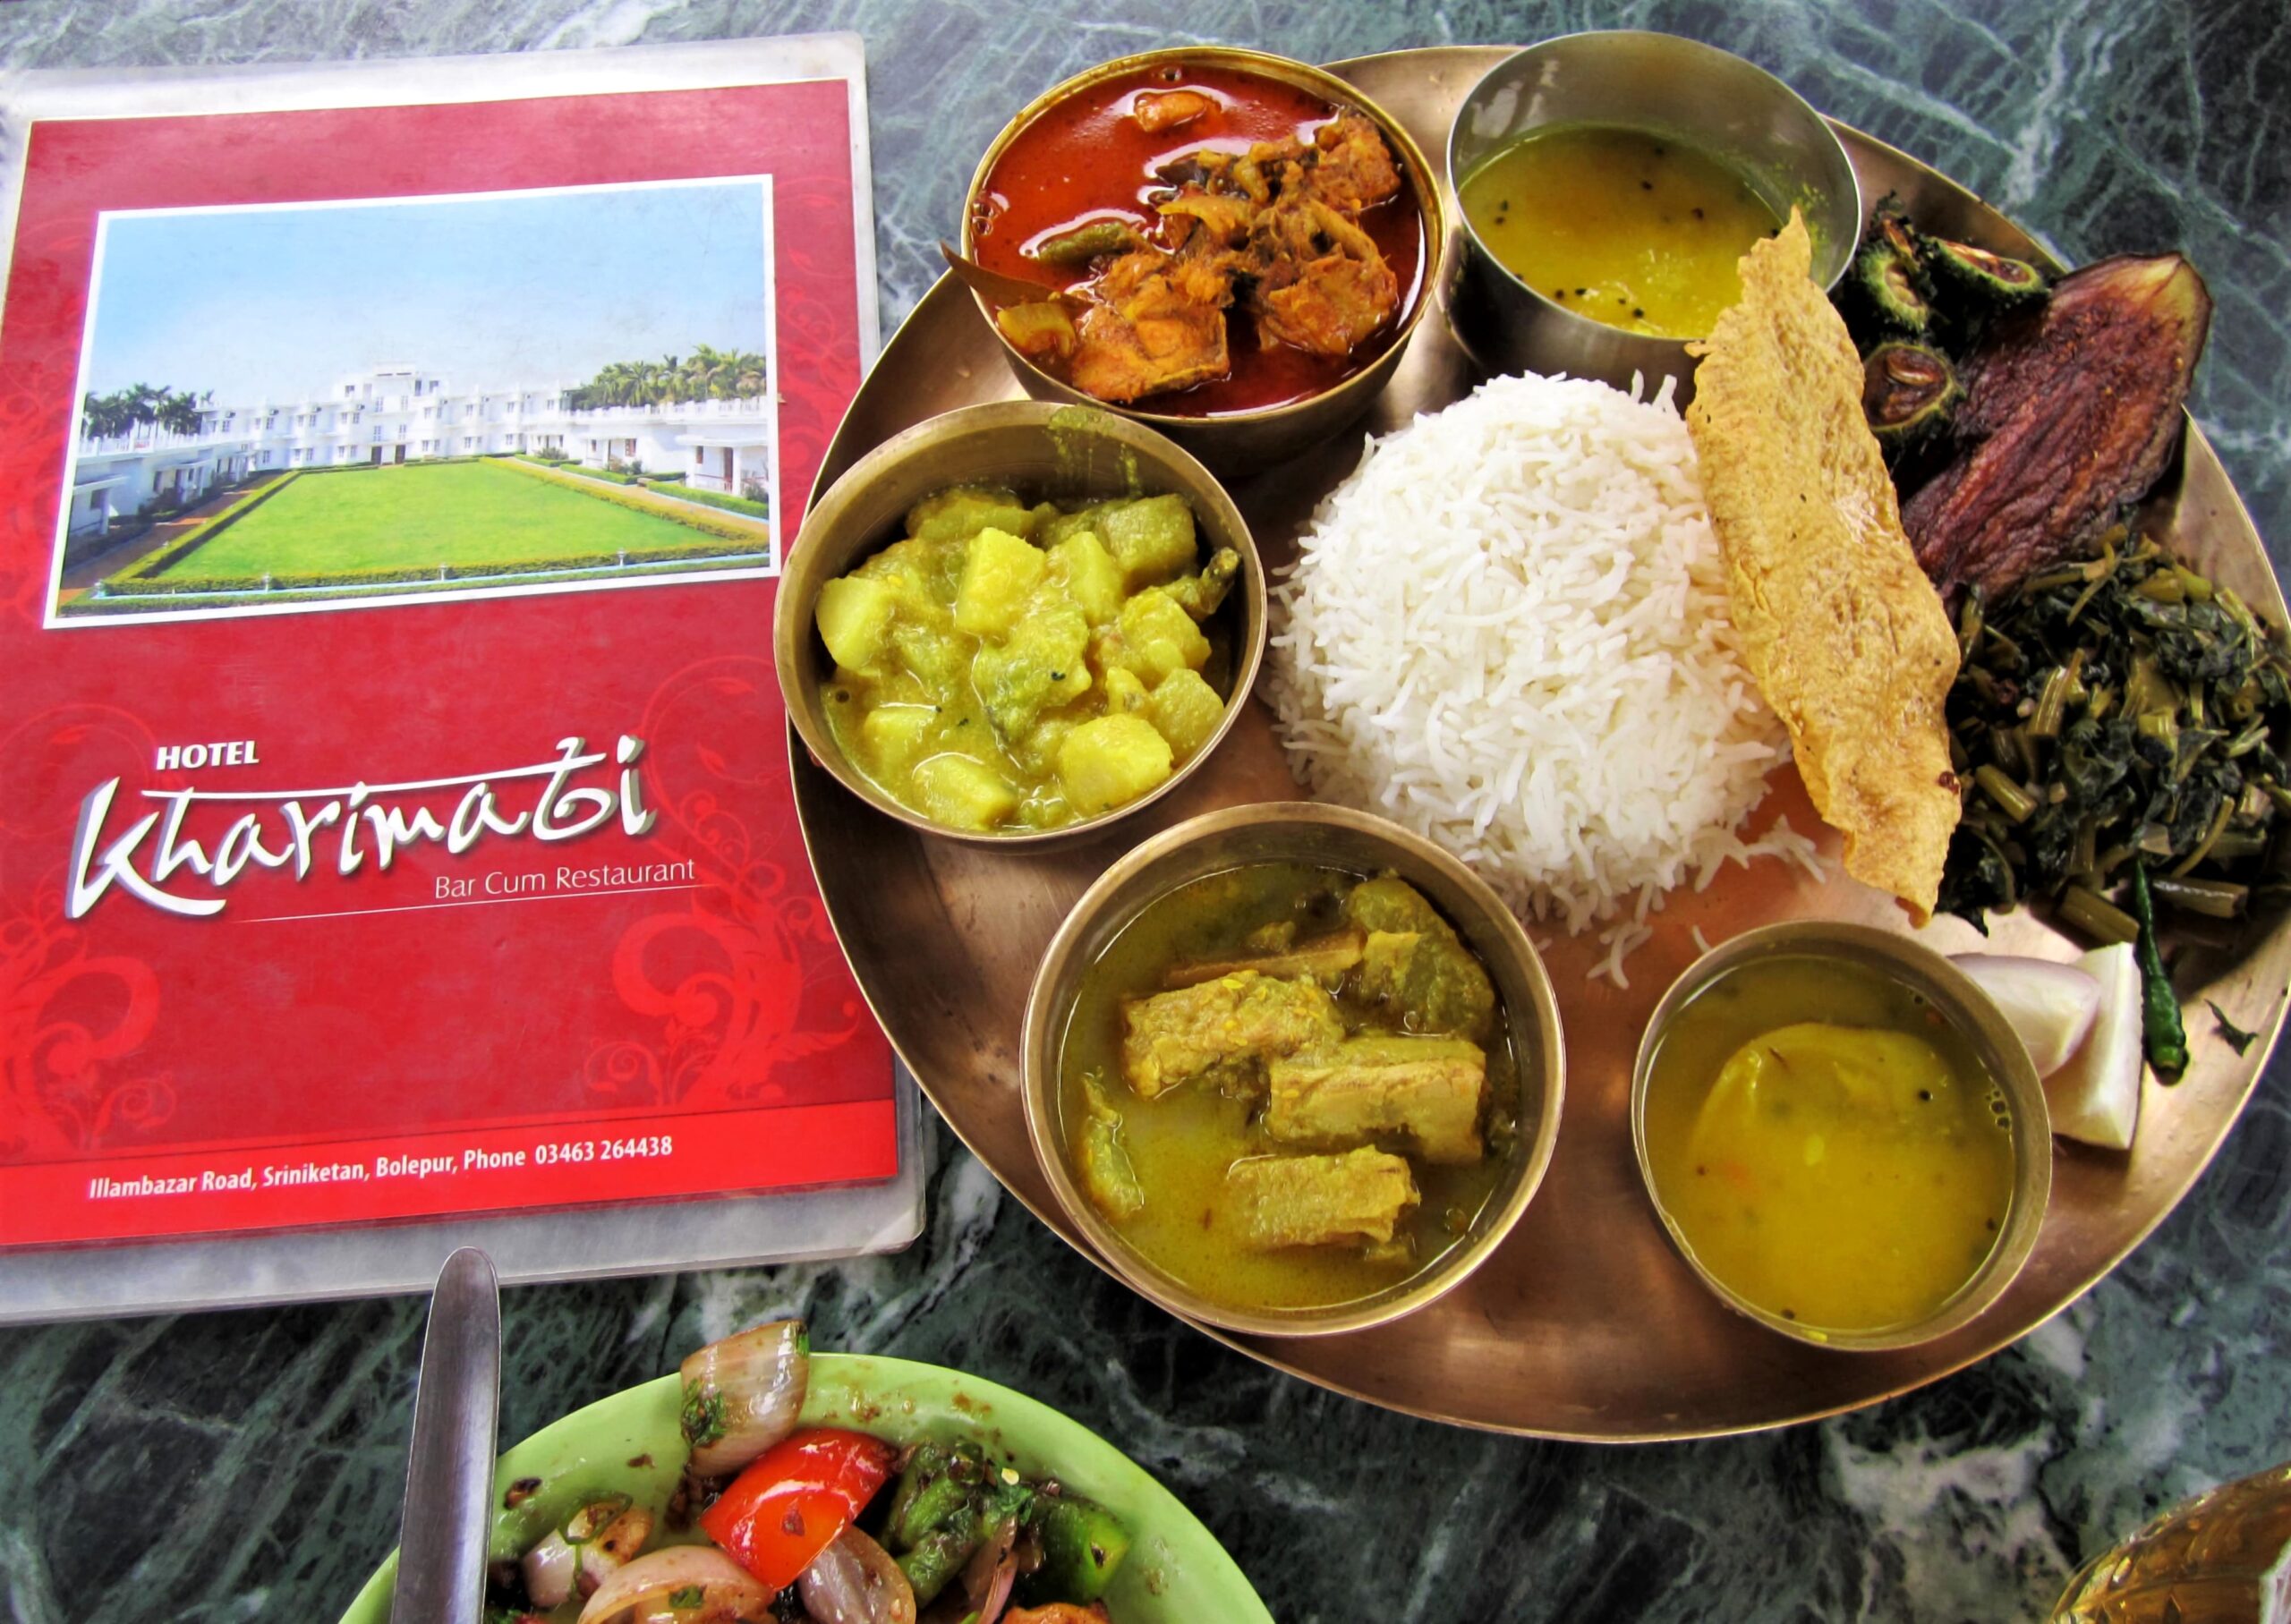 Lunch with traditional Bengali Thali at Kharimati